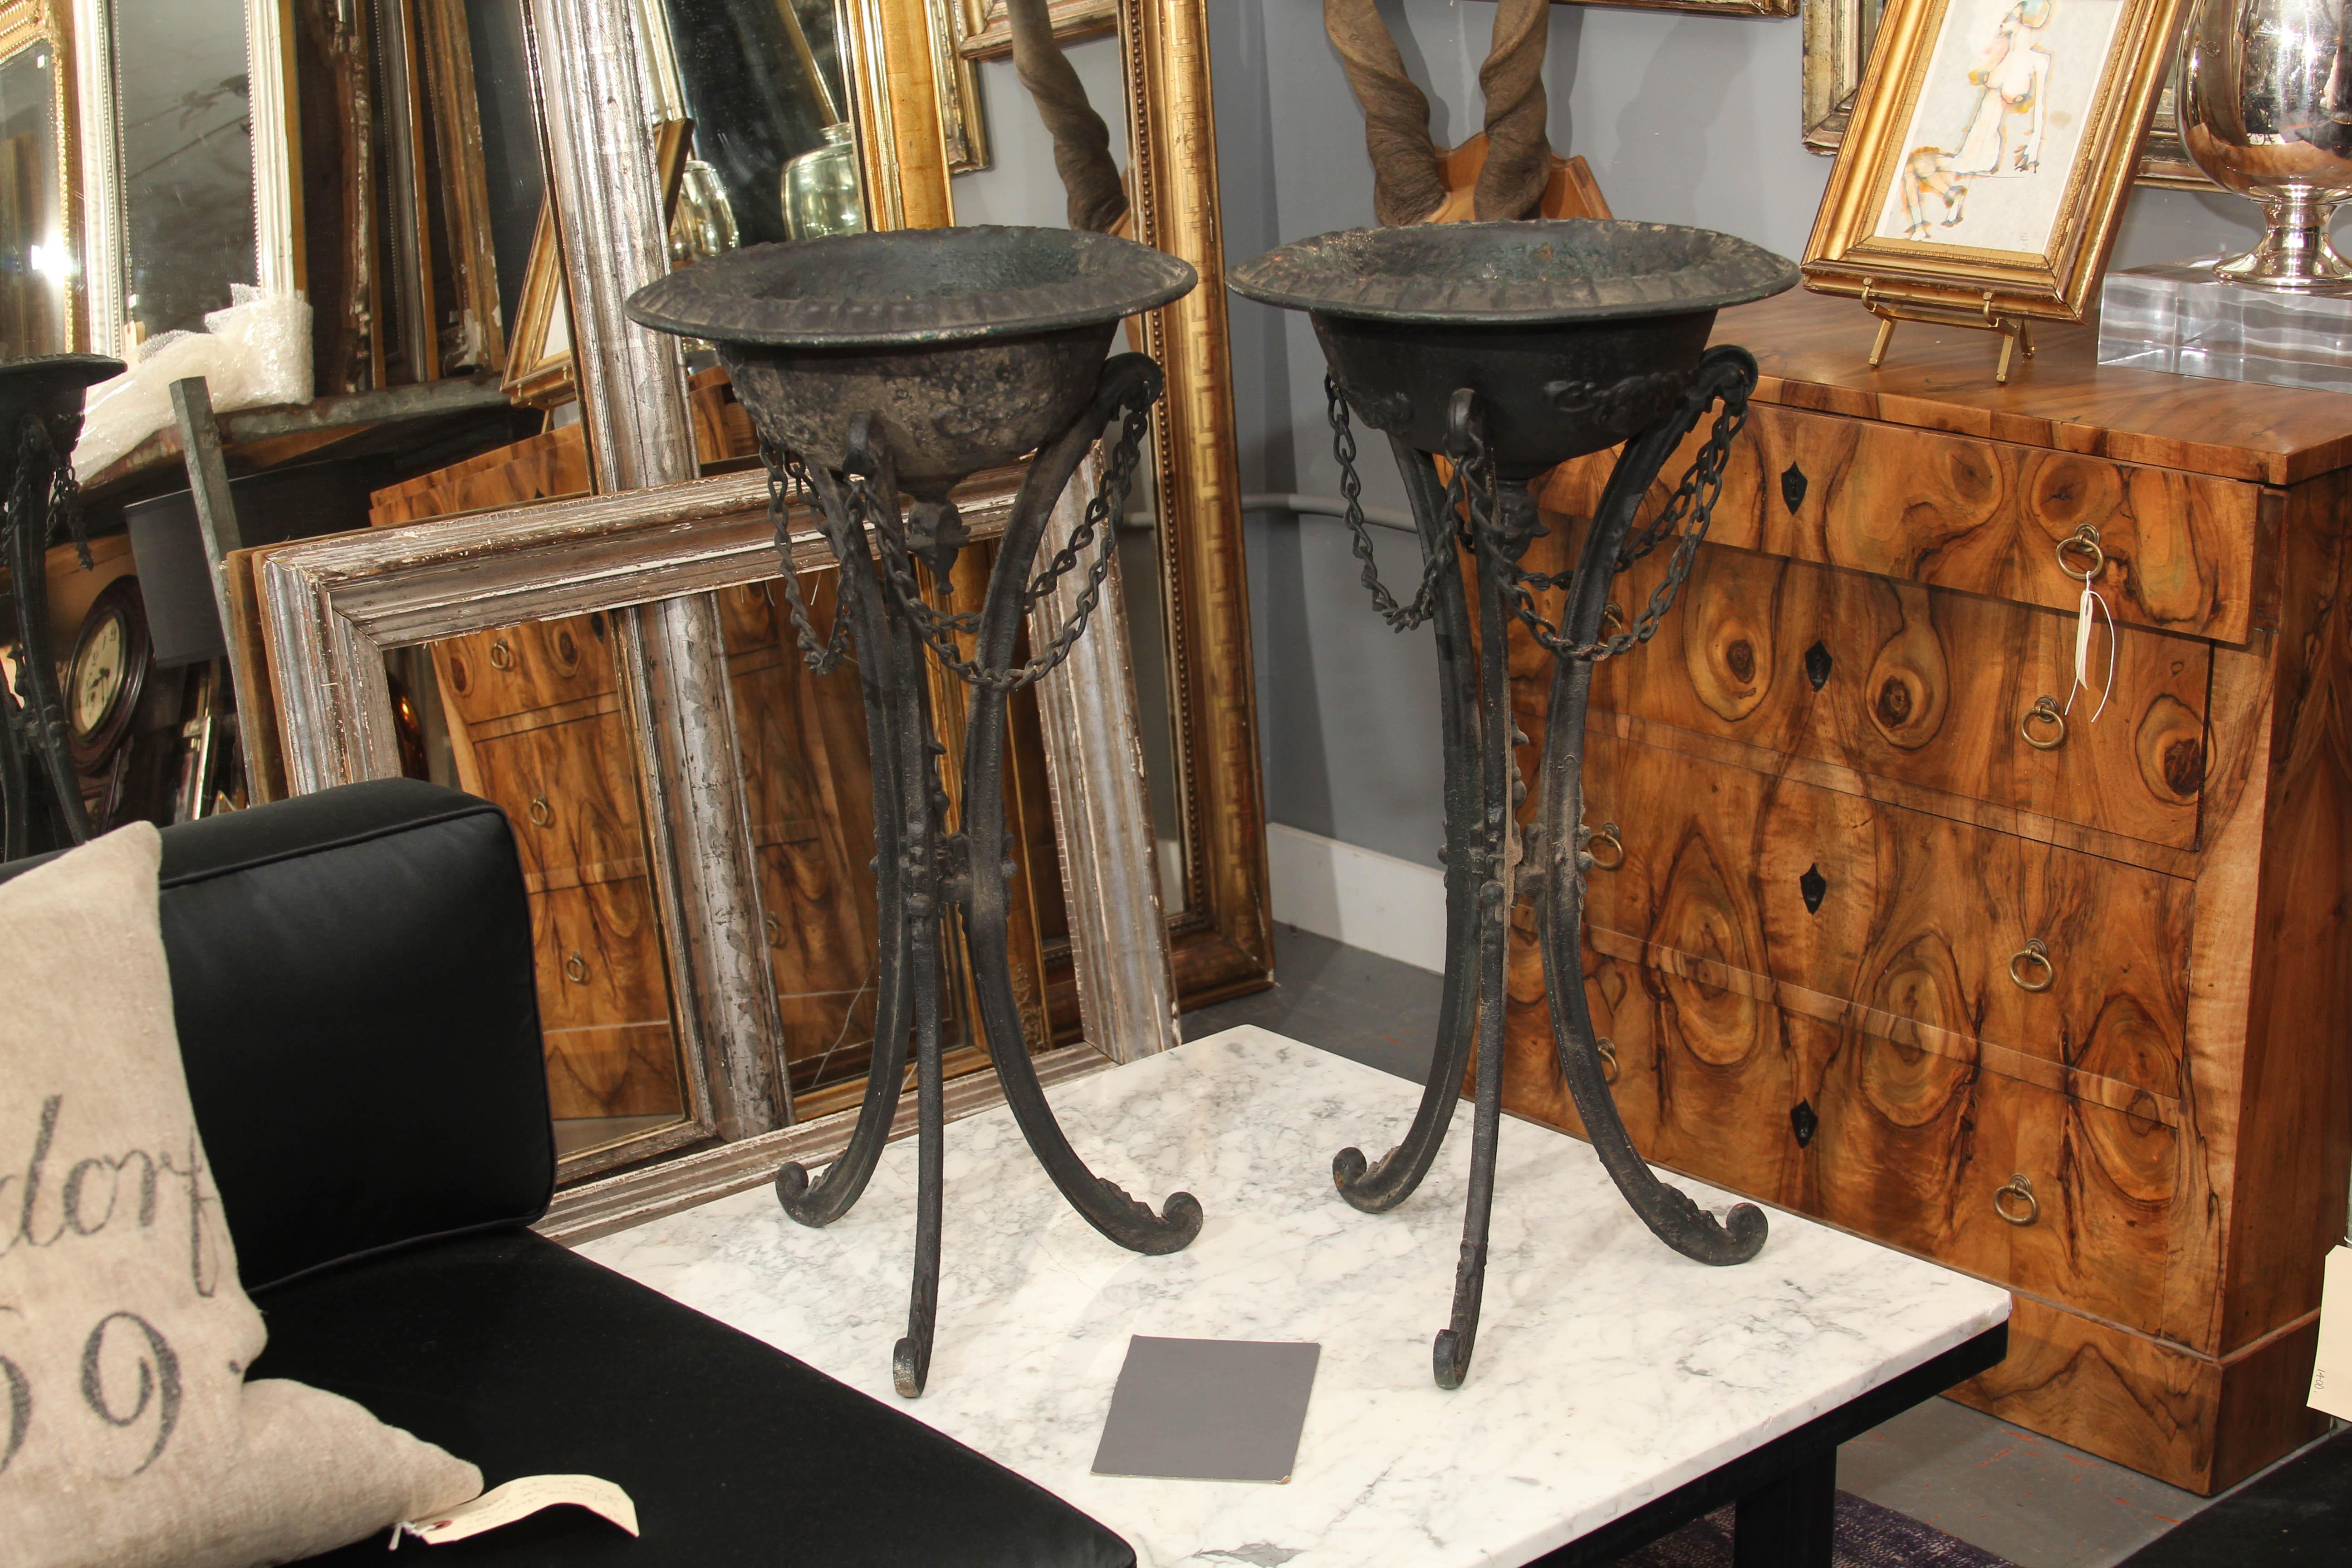 Pair of late 19th or early 20th century iron urns on tall curved tripod legs. These can be outside or used indoors. Beautiful with nothing in them as sculpture, lovely with an orchid or some other plant in them.